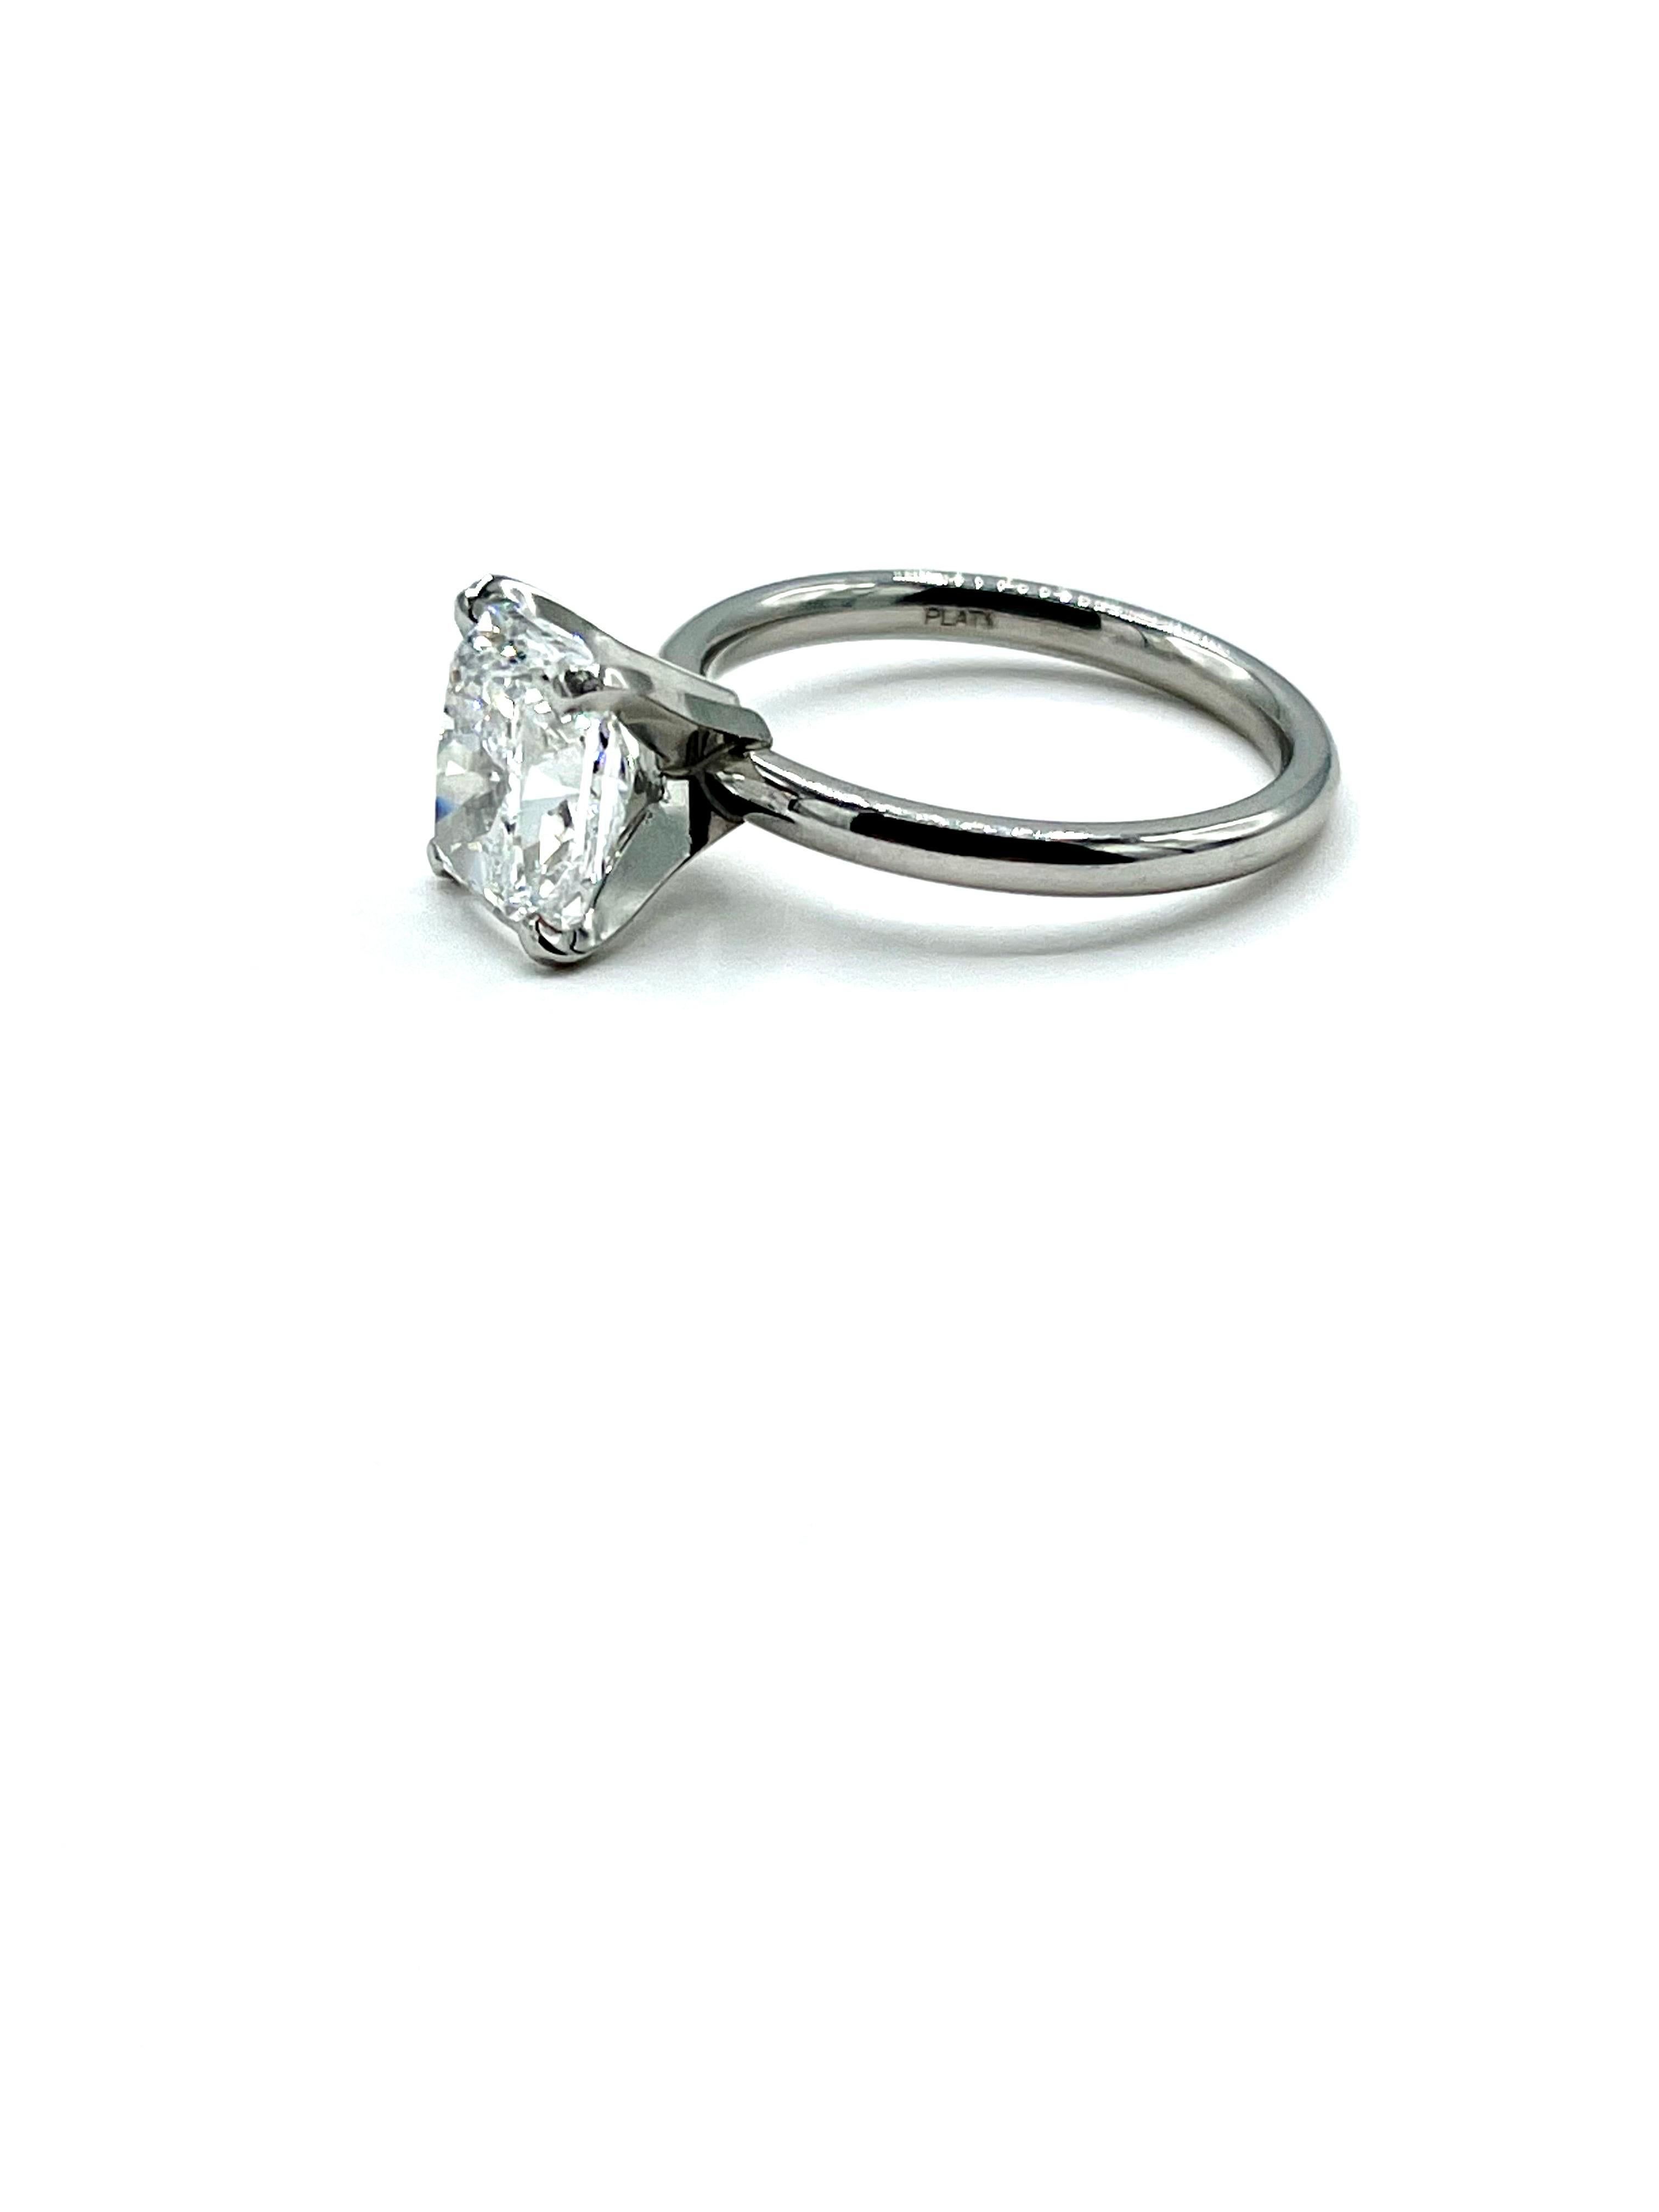 Modern 2.60 Carat Cushion Modified Brilliant Diamond and Platinum Solitaire Ring